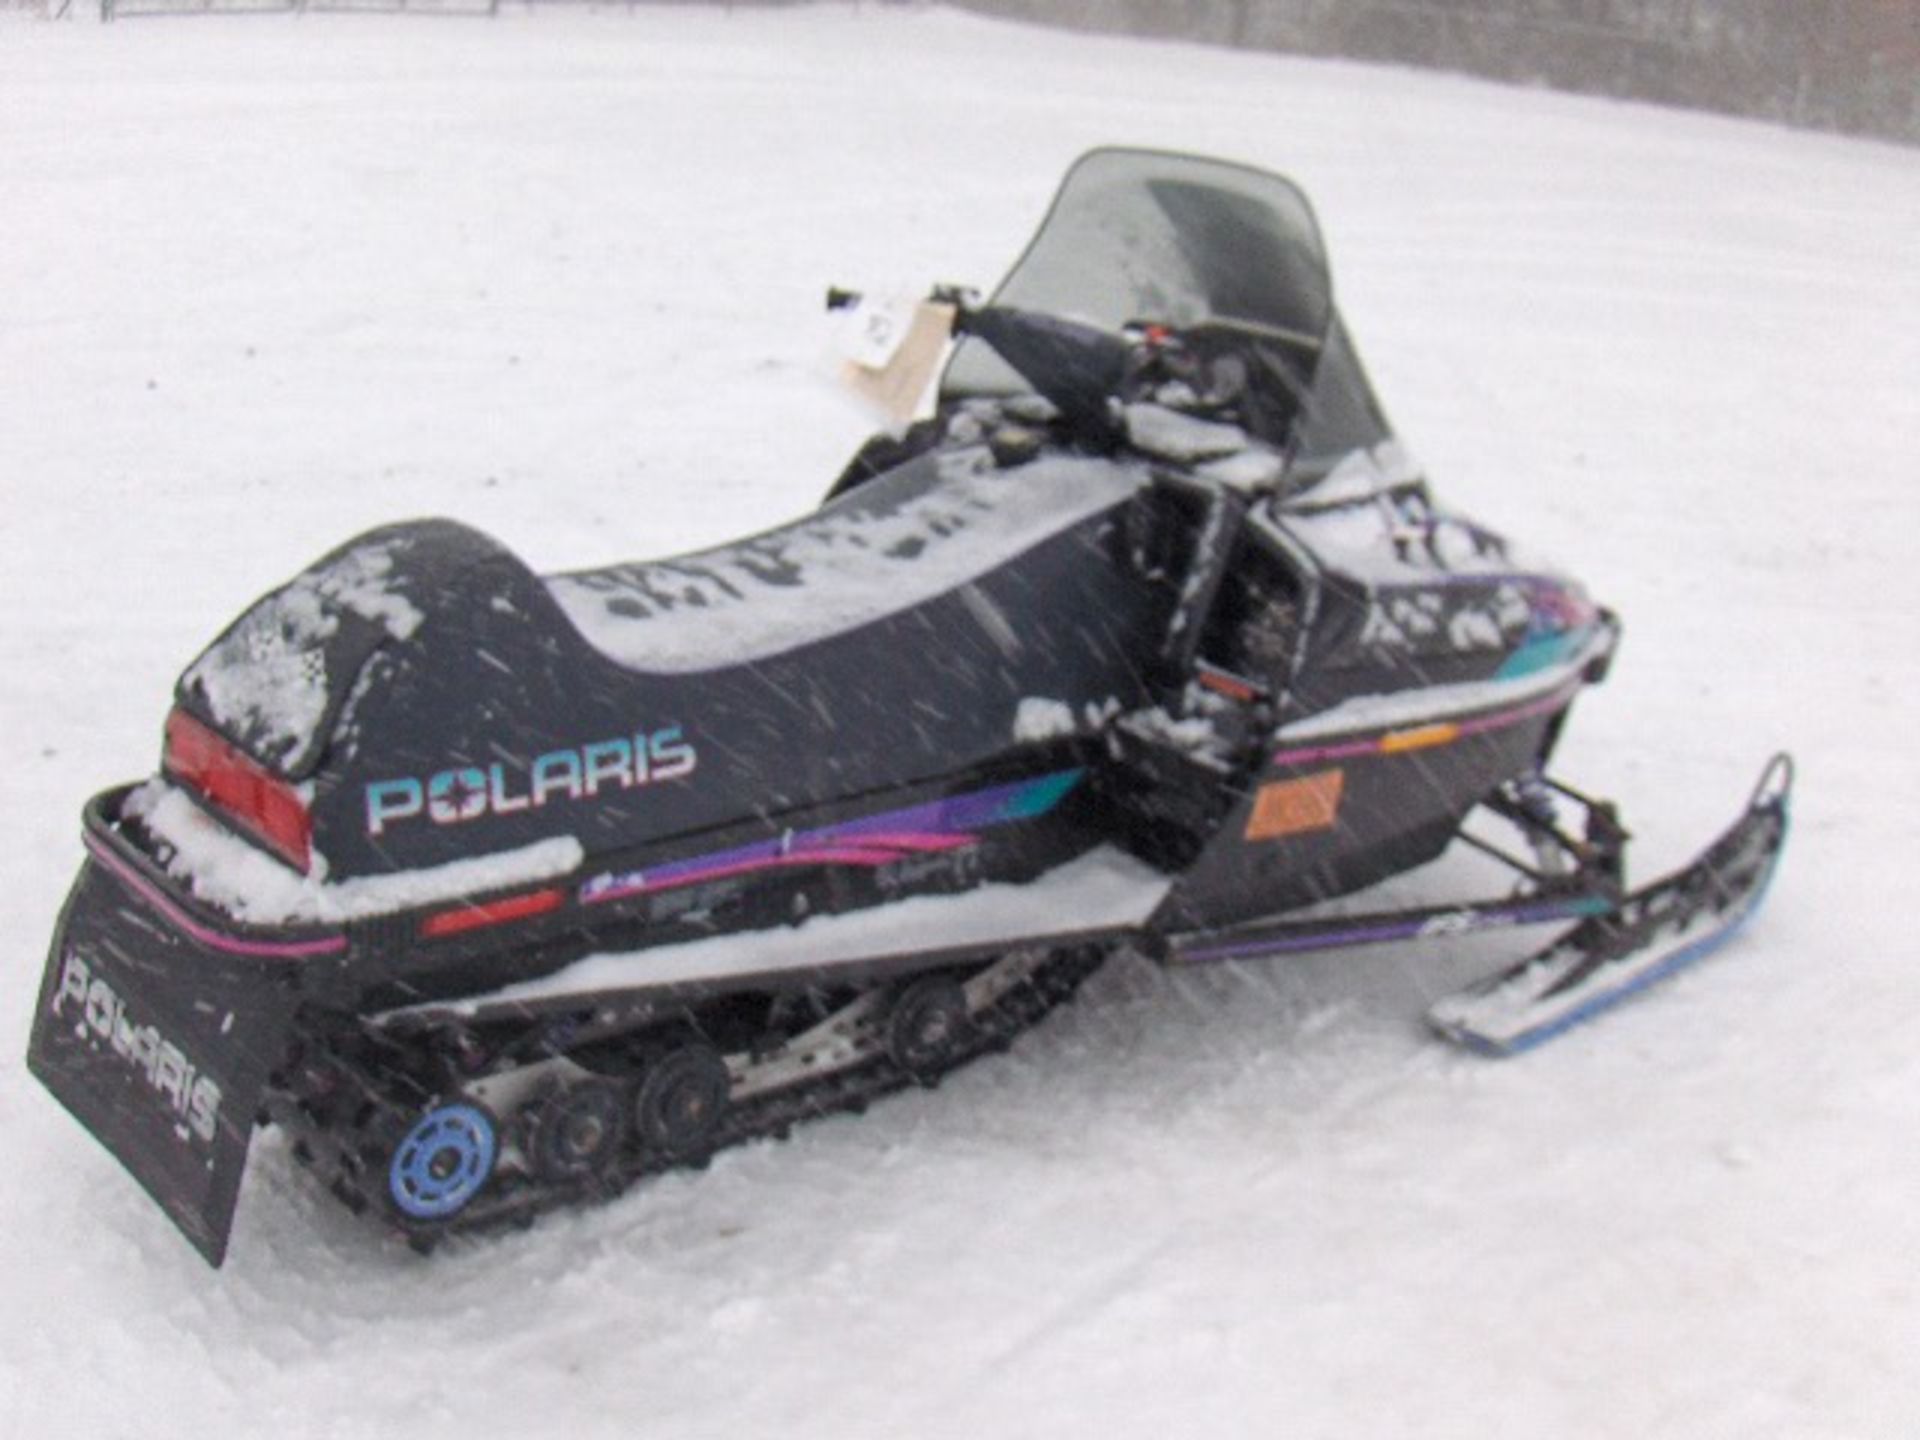 1996 POLARIS 600 XLT  2647050 snowmobile, owner started at time of auction check in, rebuilt engine, - Image 4 of 4